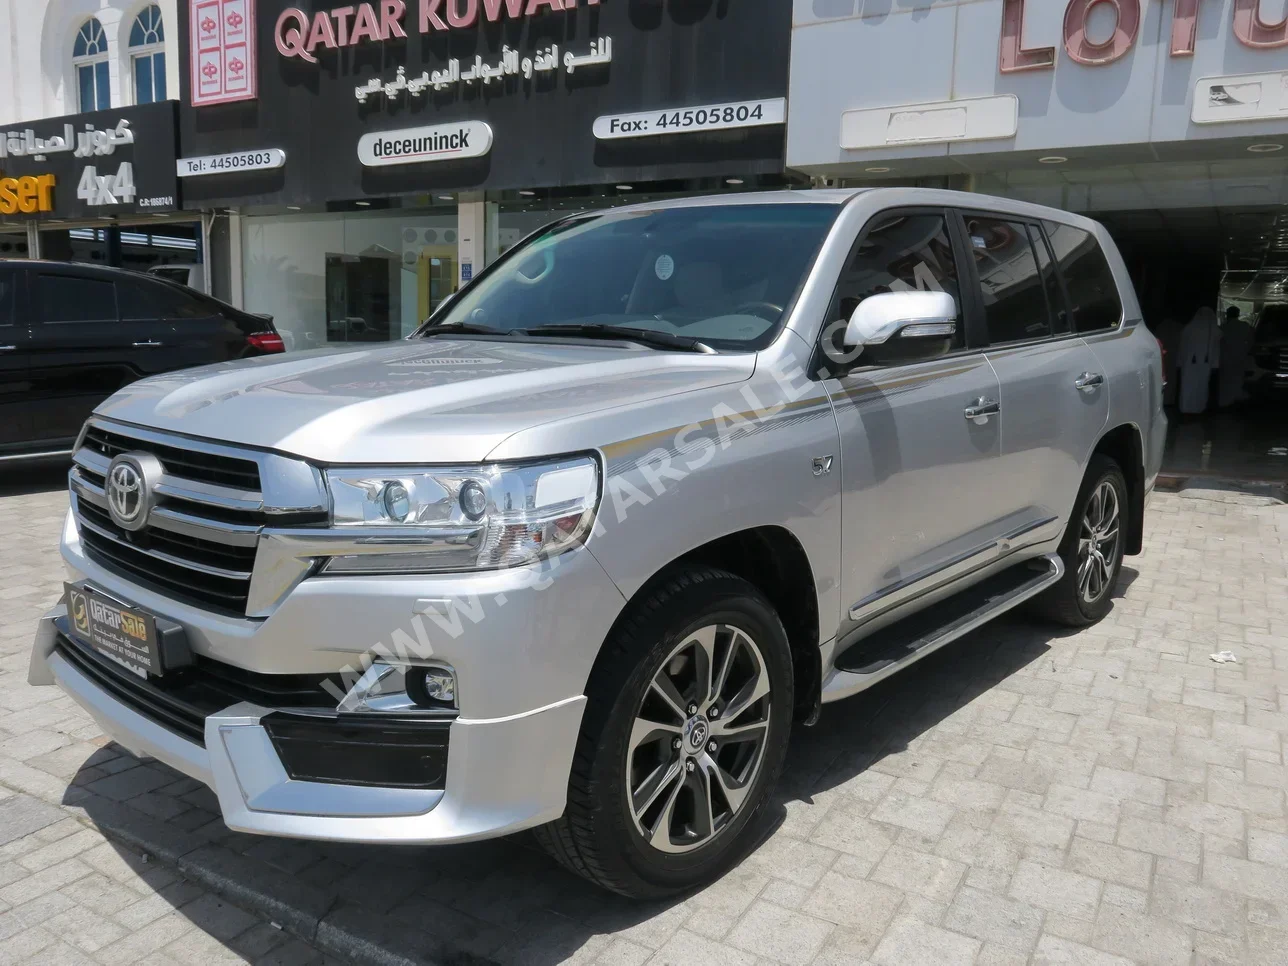 Toyota  Land Cruiser  VXR- Grand Touring S  2020  Automatic  122,000 Km  8 Cylinder  Four Wheel Drive (4WD)  SUV  Silver